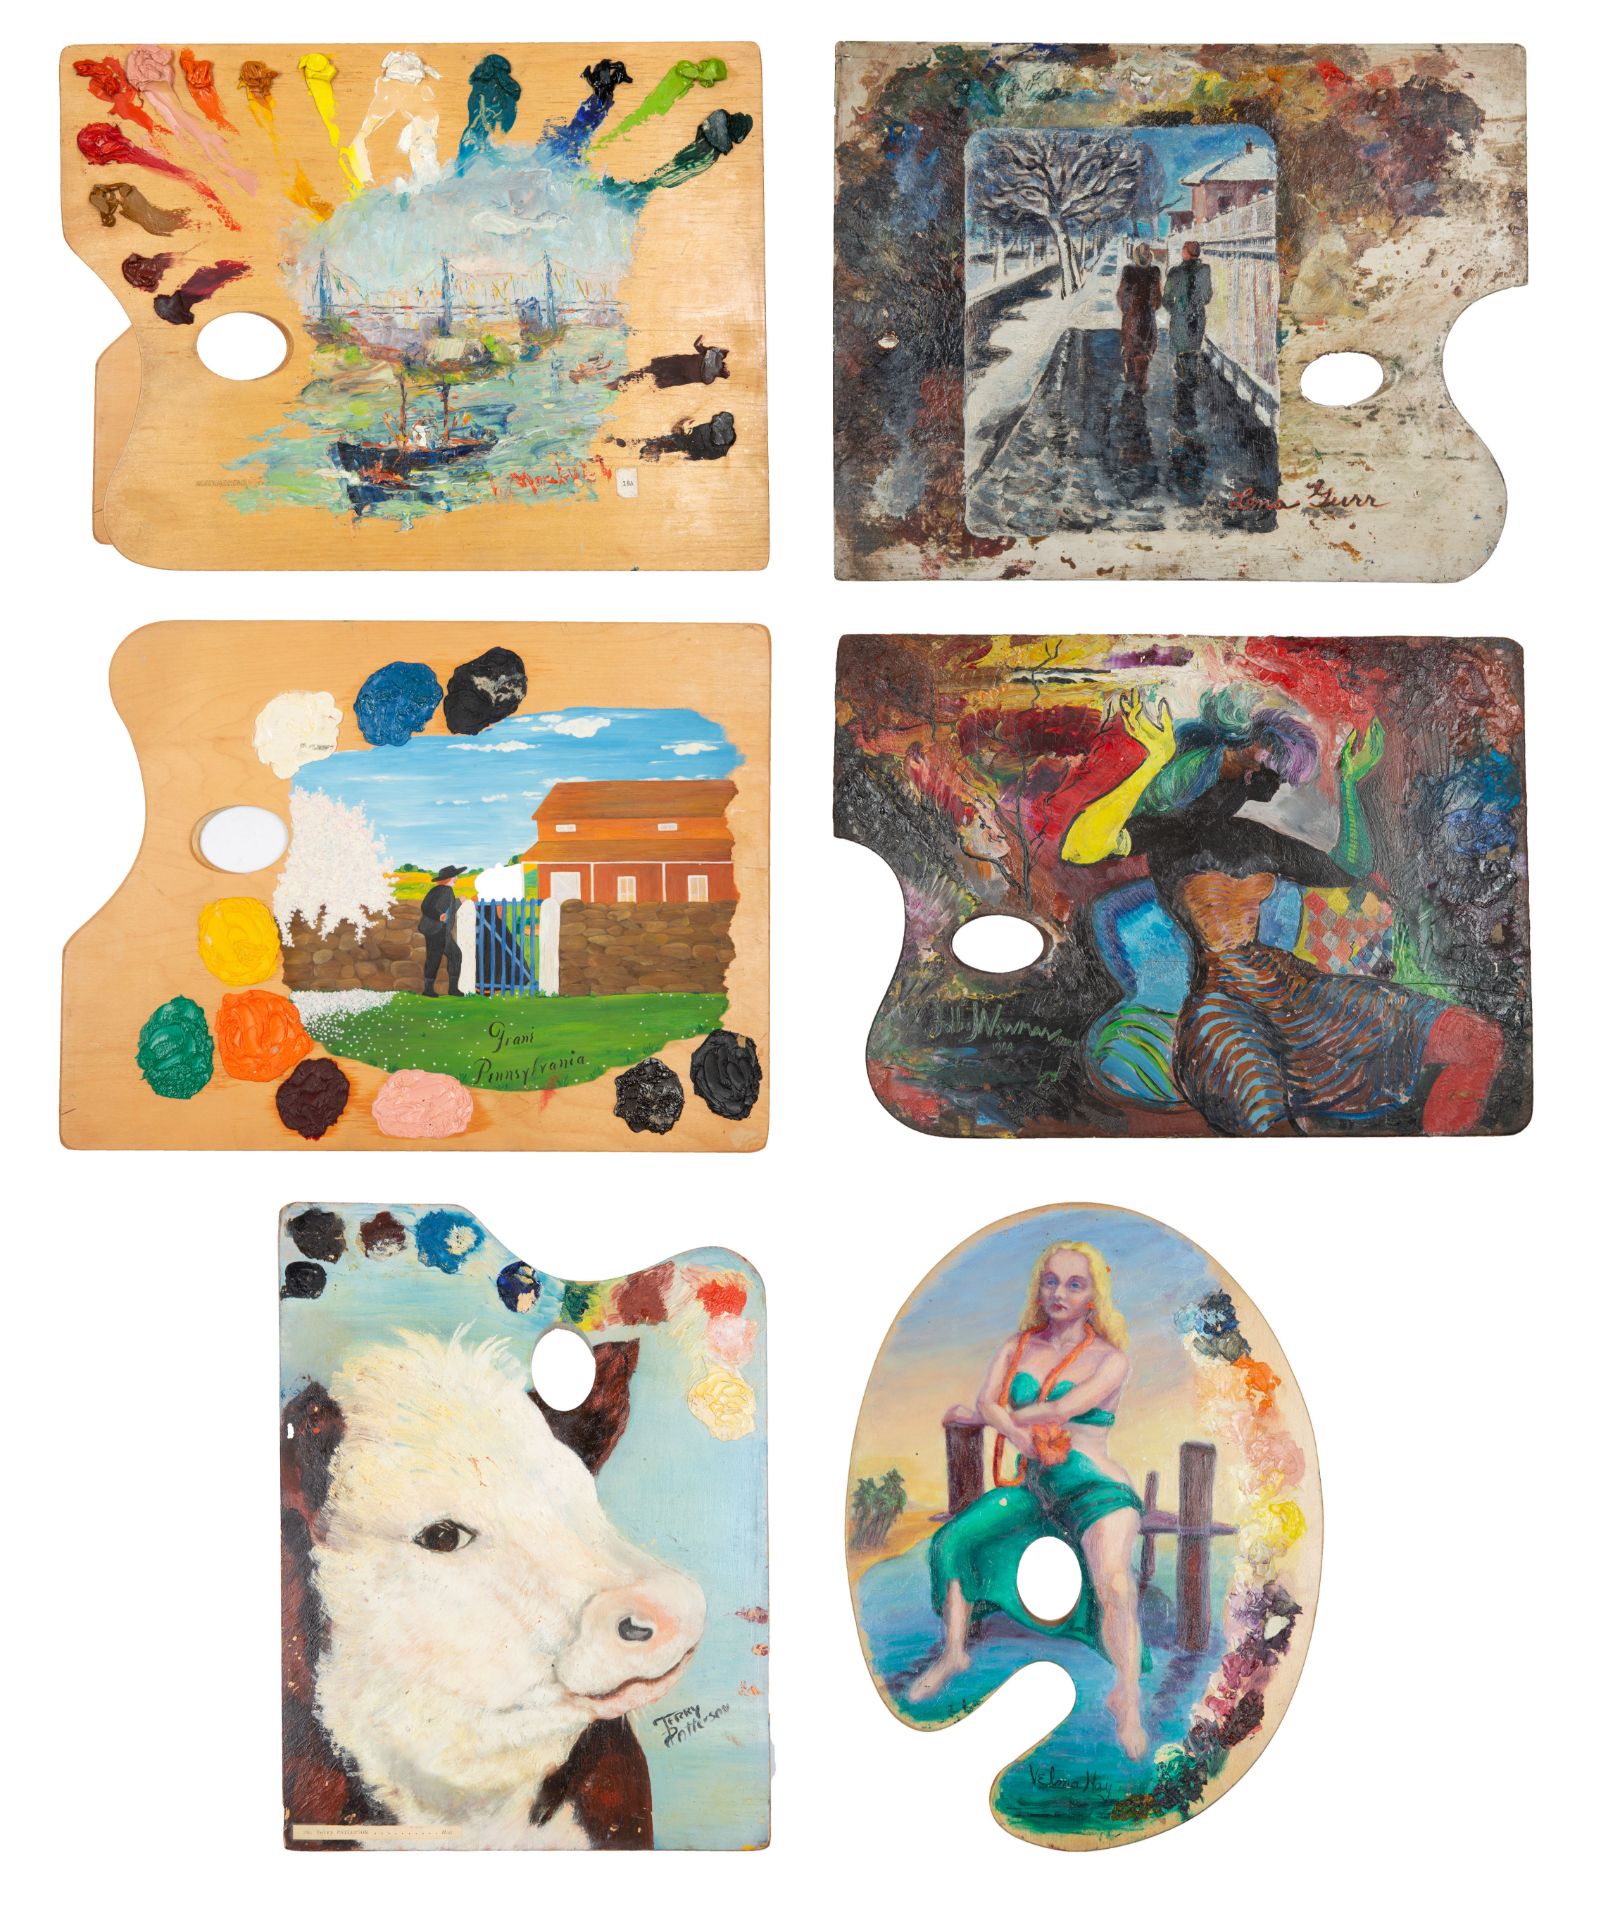 A GROUP OF SIX 20TH CENTURY PAINTED ARTIST PALETTES, INCLUDING LENA GURR (AMERICAN 1897-1992), JOHN